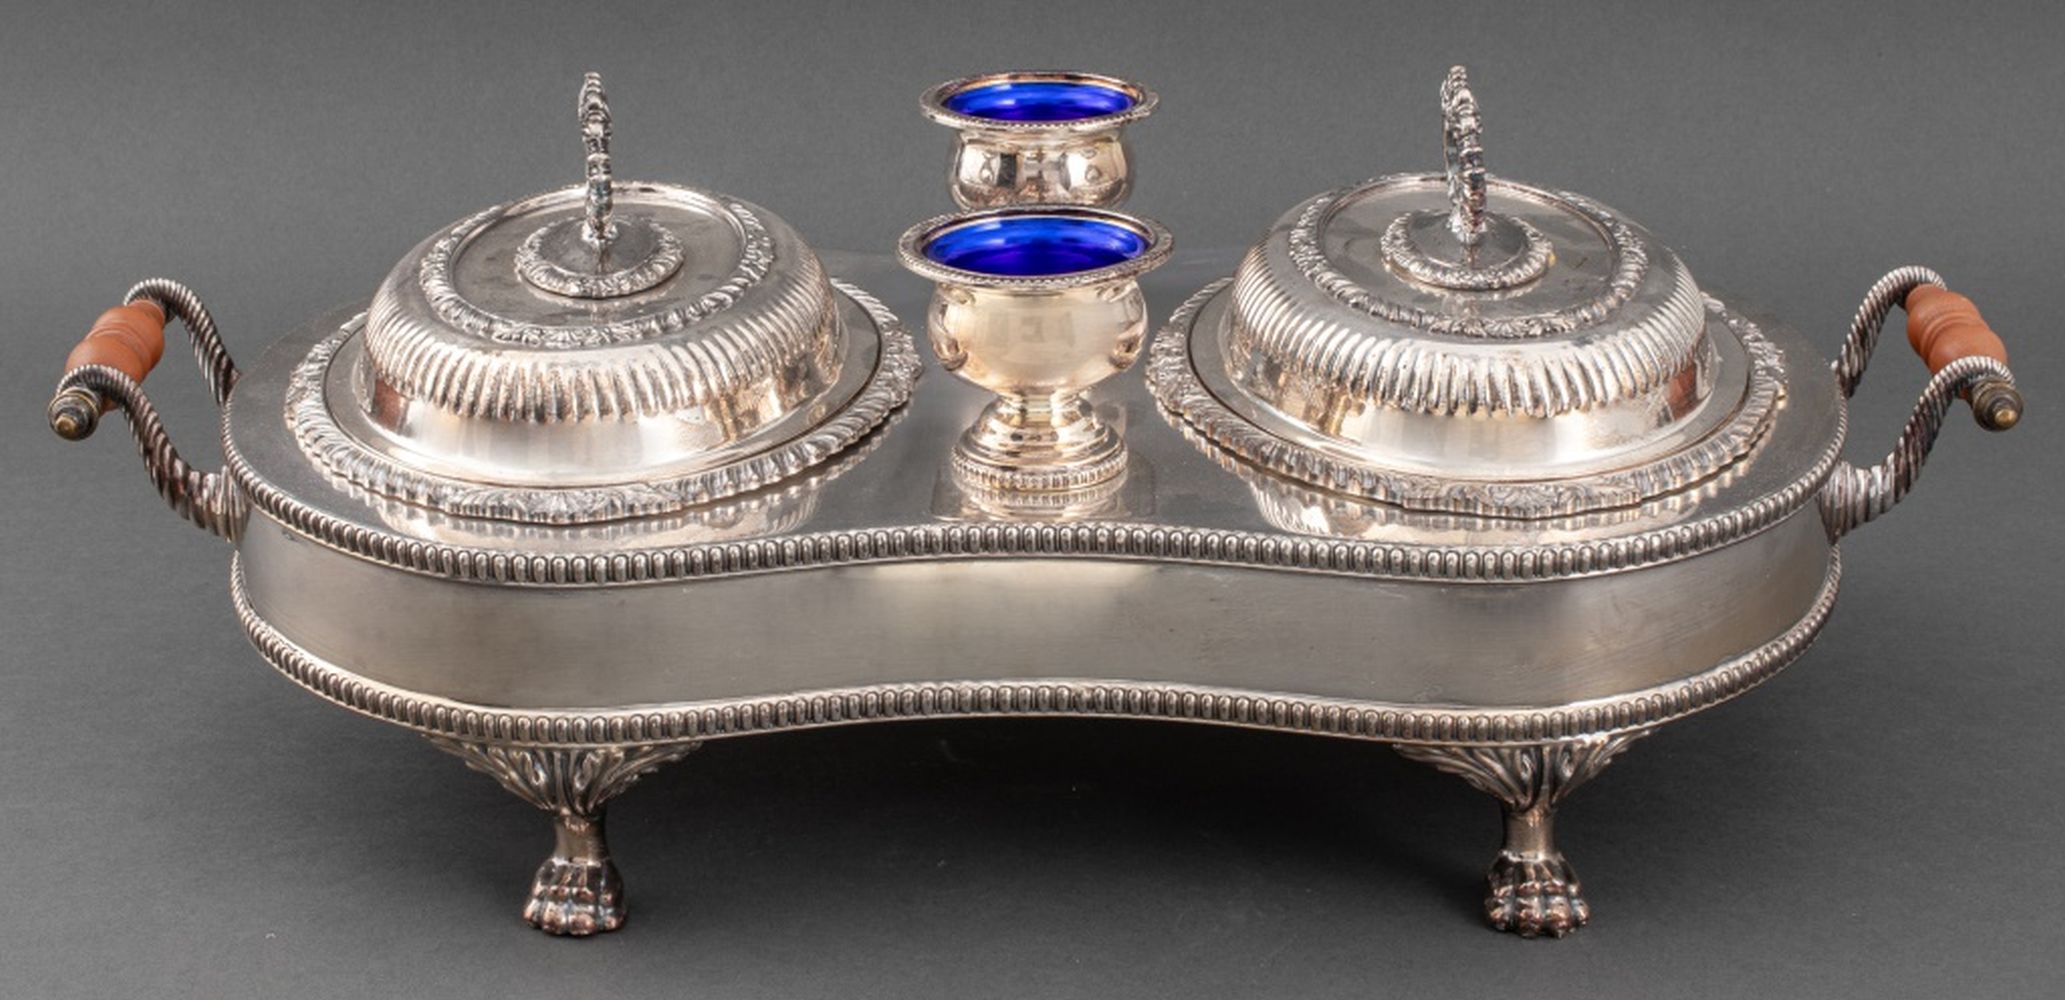 AMERICAN SILVERPLATE CHAFING DISH